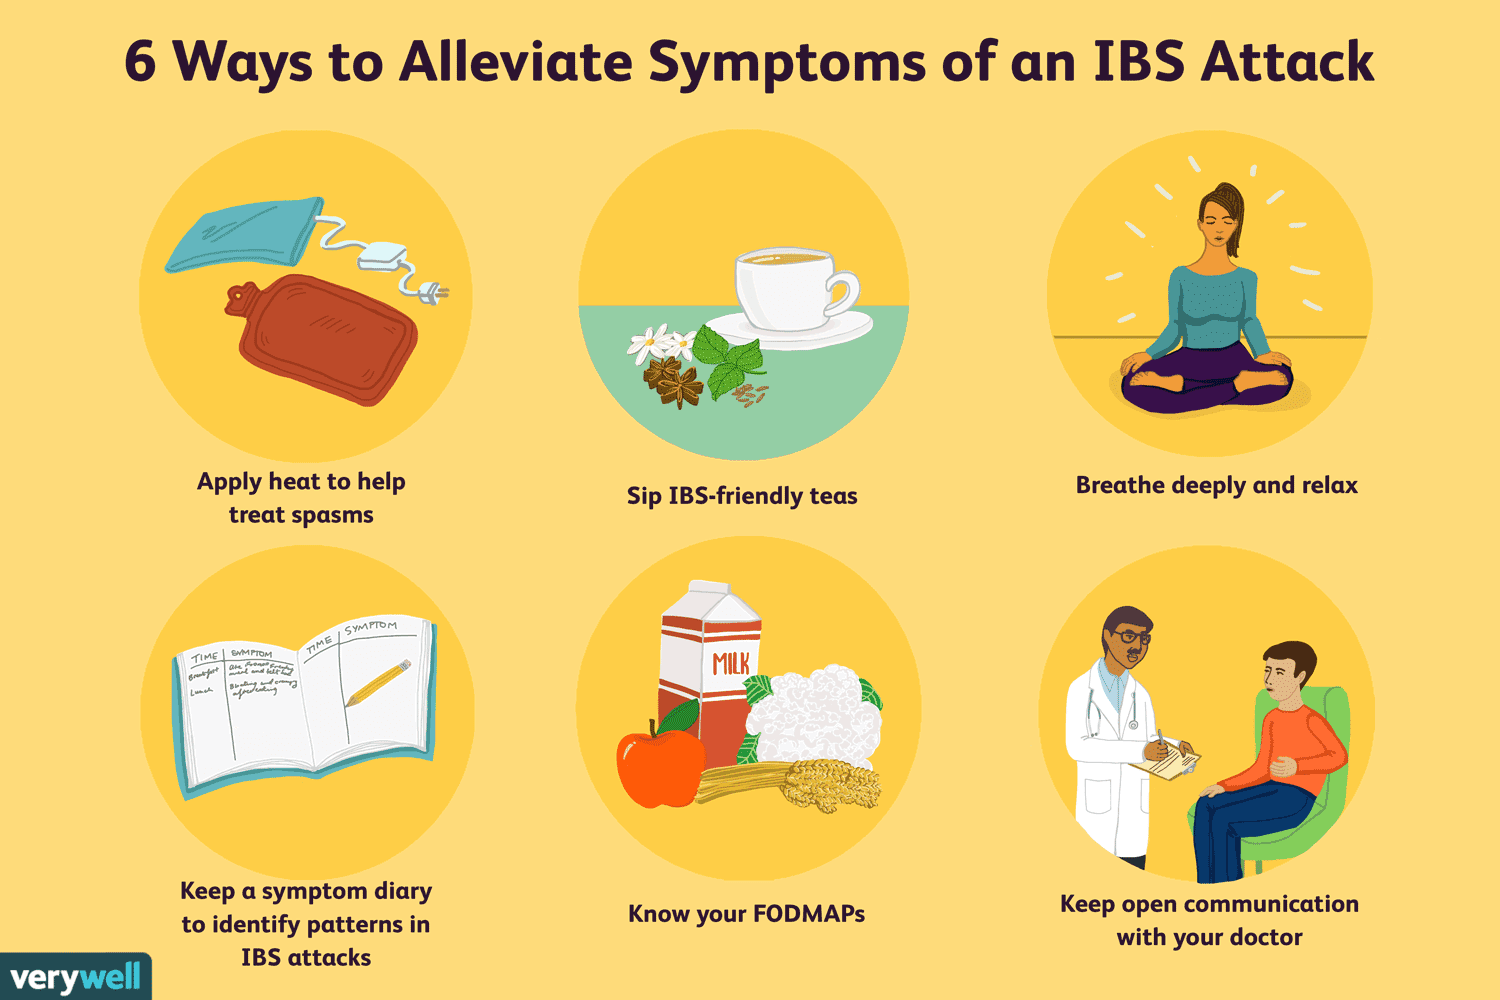 Ibs. Irritable Bowel Syndrome (IBS) Symptoms, Causes and ...